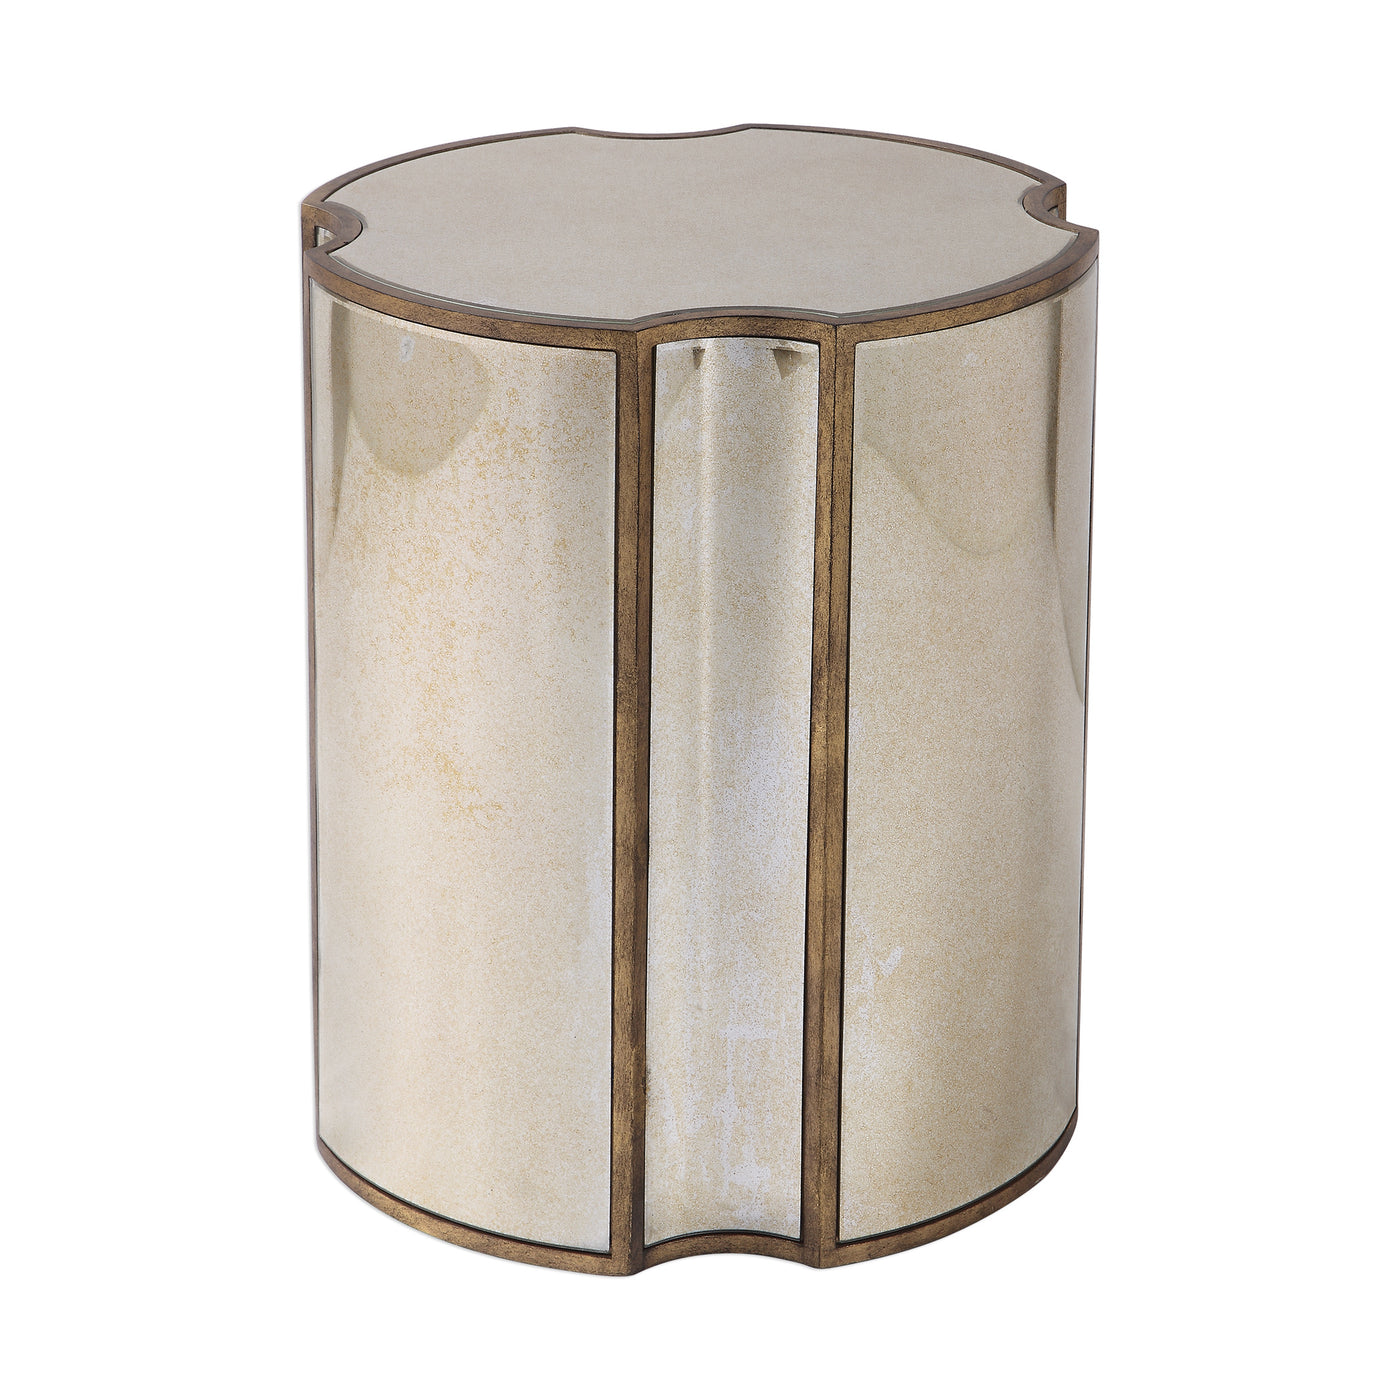 Add Unique Style To A Space With This Quatrefoil Designed Accent Table. Each Facet Features A Curved Antique Mirror Surrou...